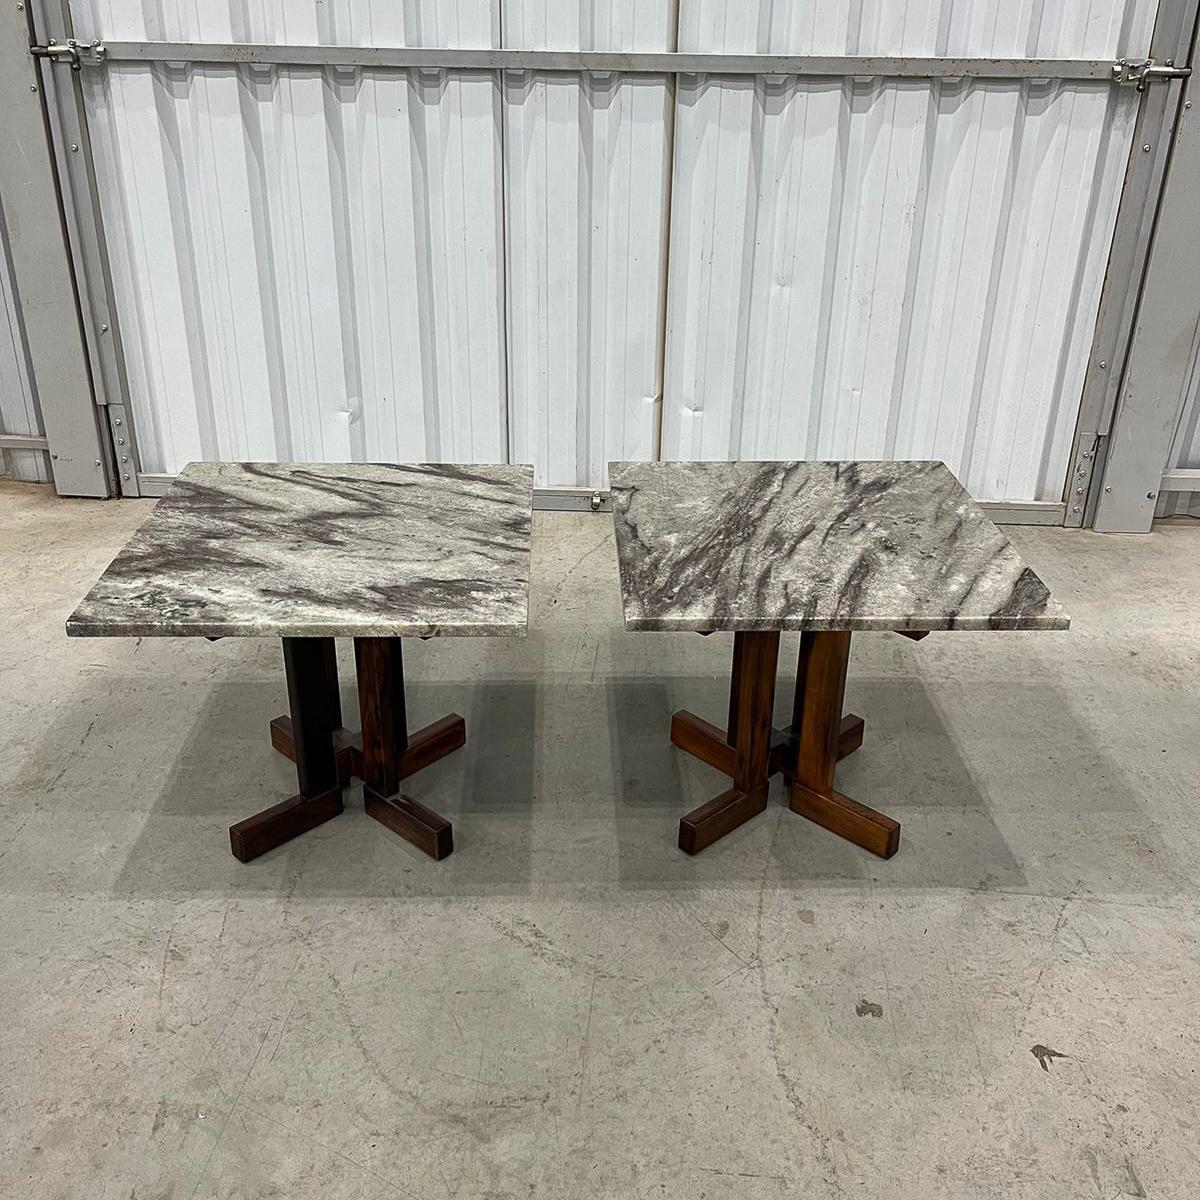 Brazilian Modern Pair of Side Tables in Rosewood and Granite by Celina, c. 1960 In Good Condition For Sale In New York, NY